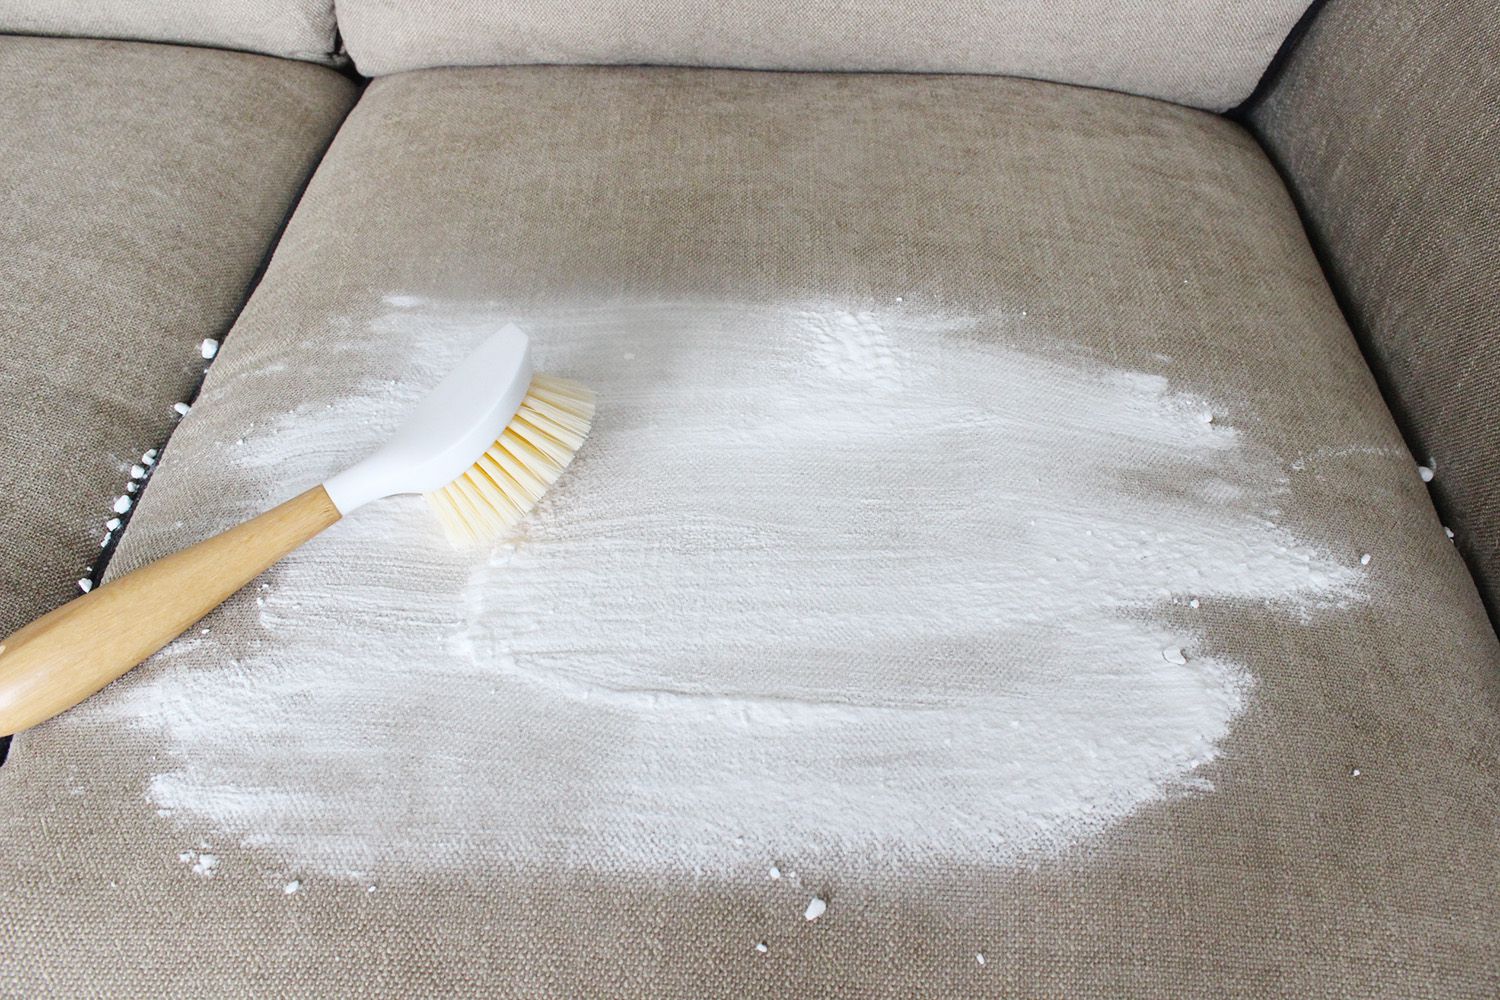 How To Deep Clean A Used Couch